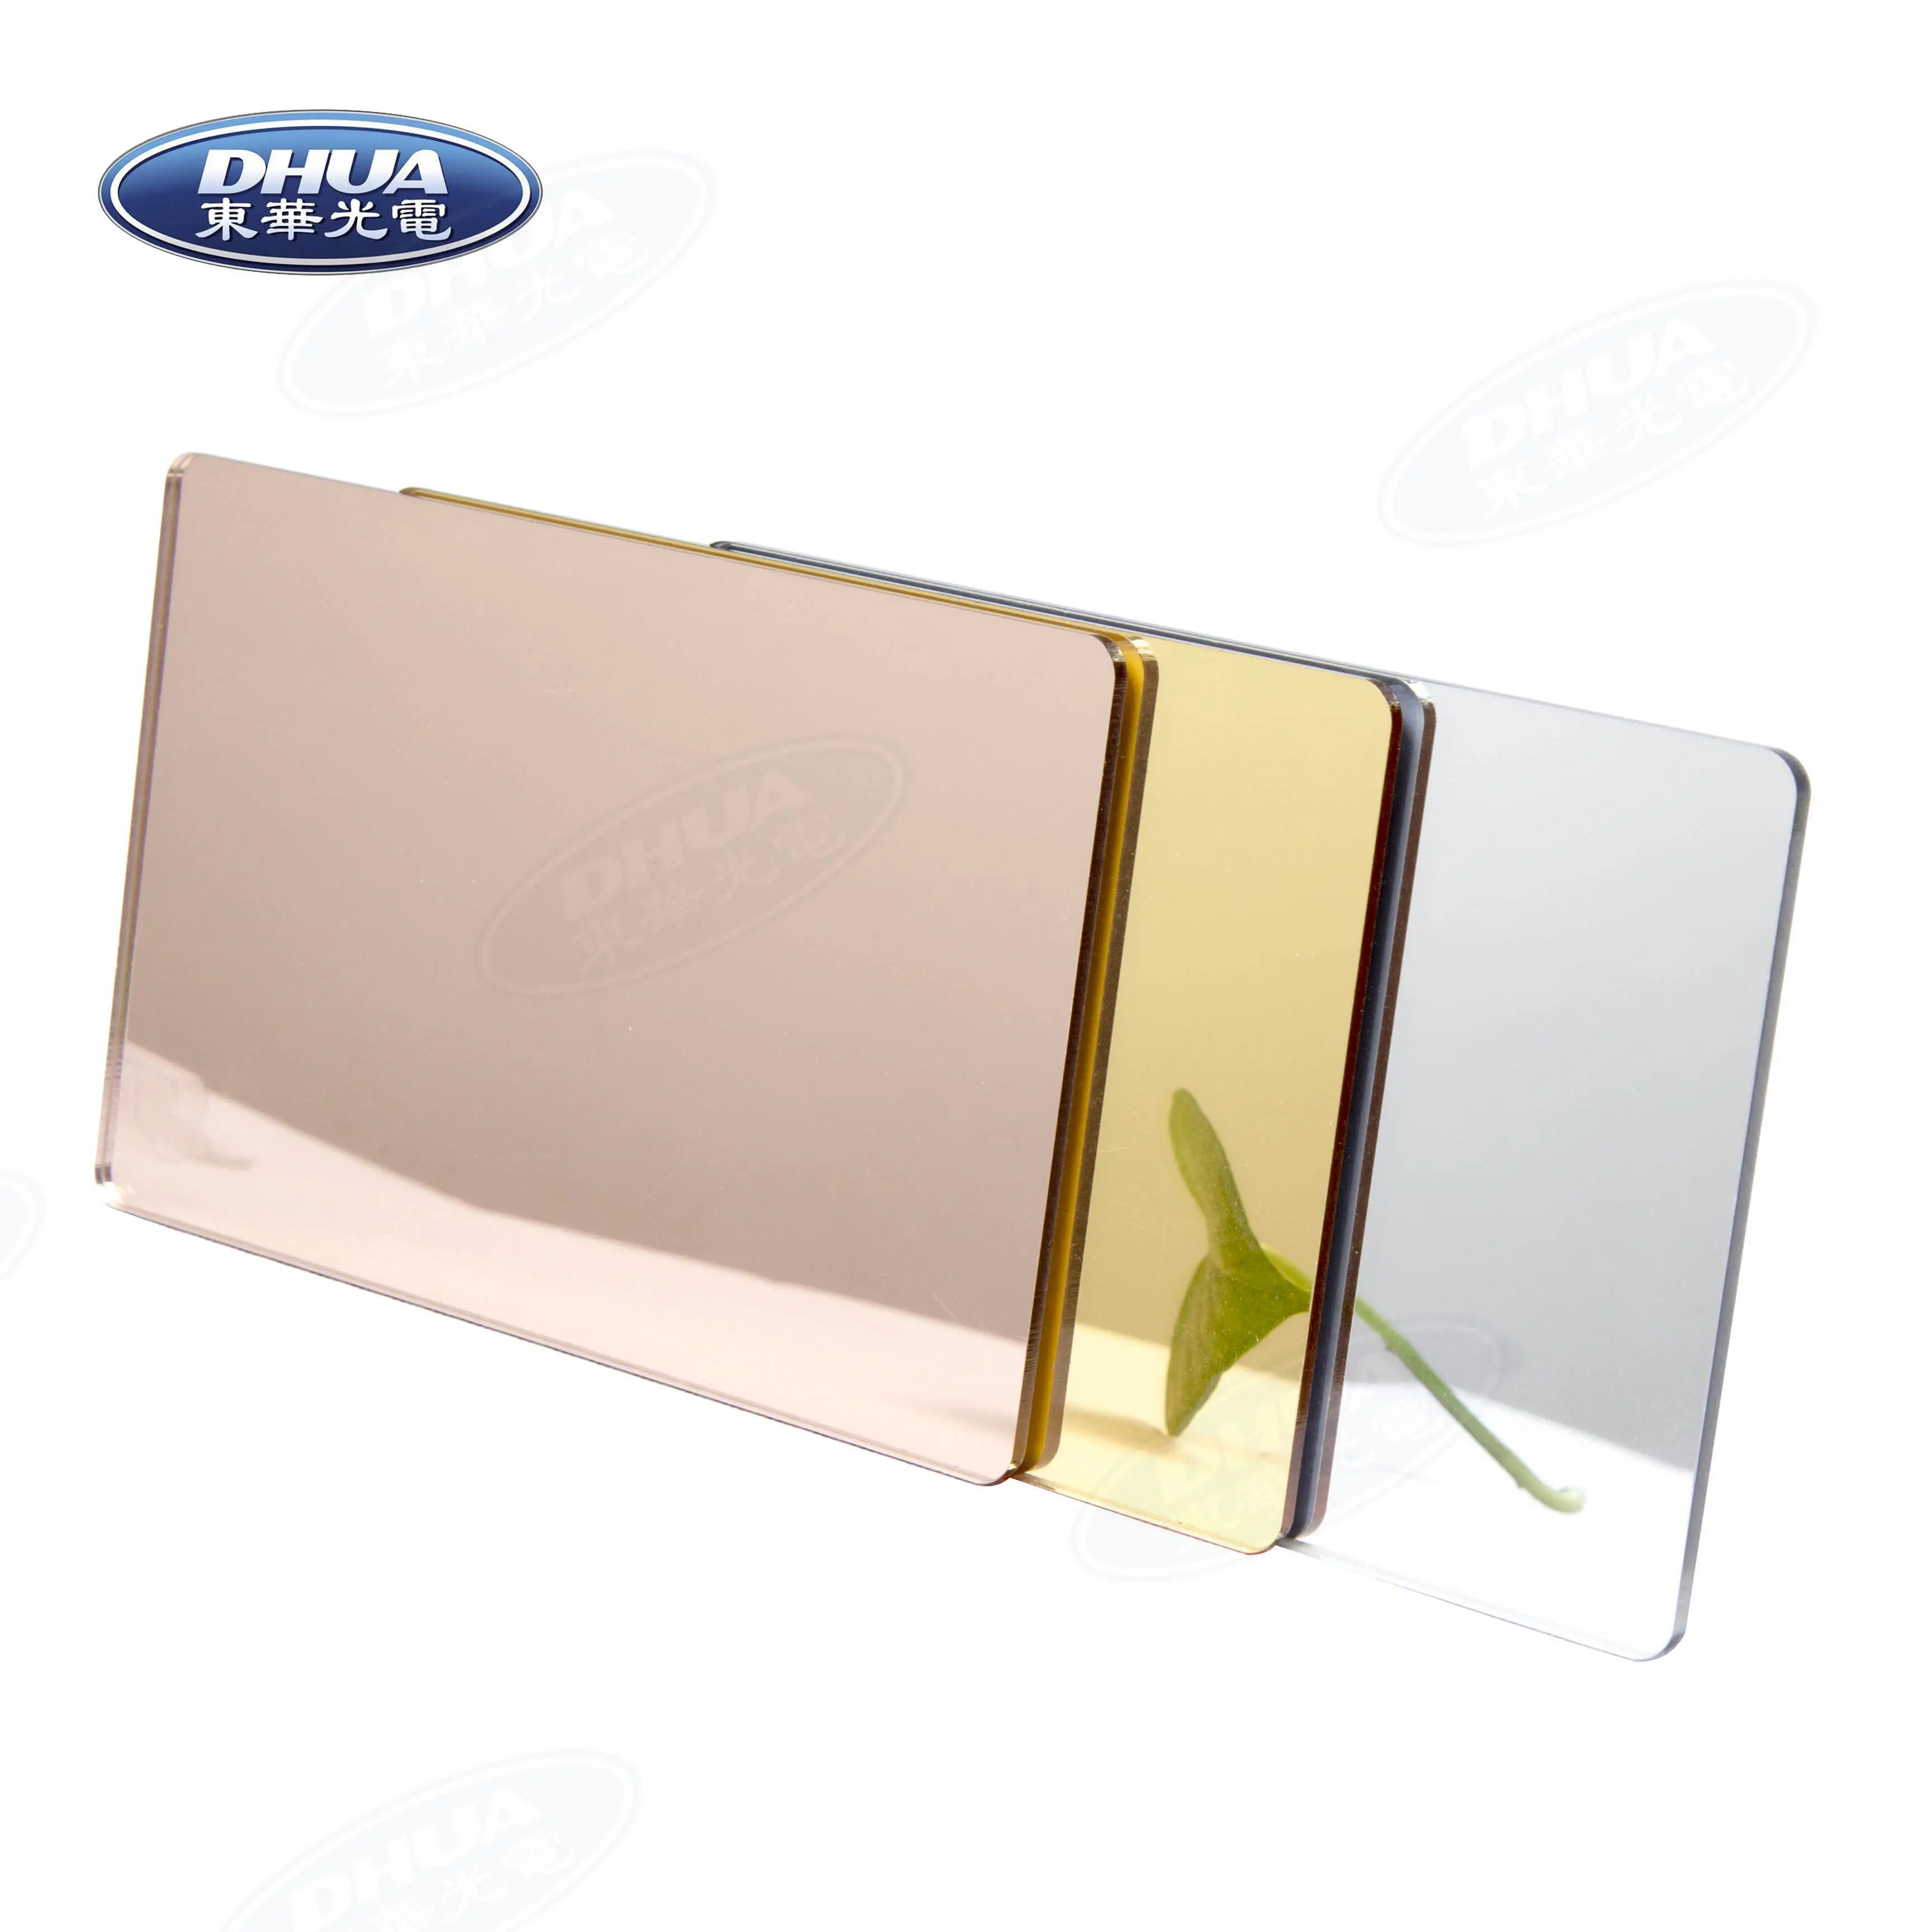 AR Coated Acrylic Mirror with scratch resistance